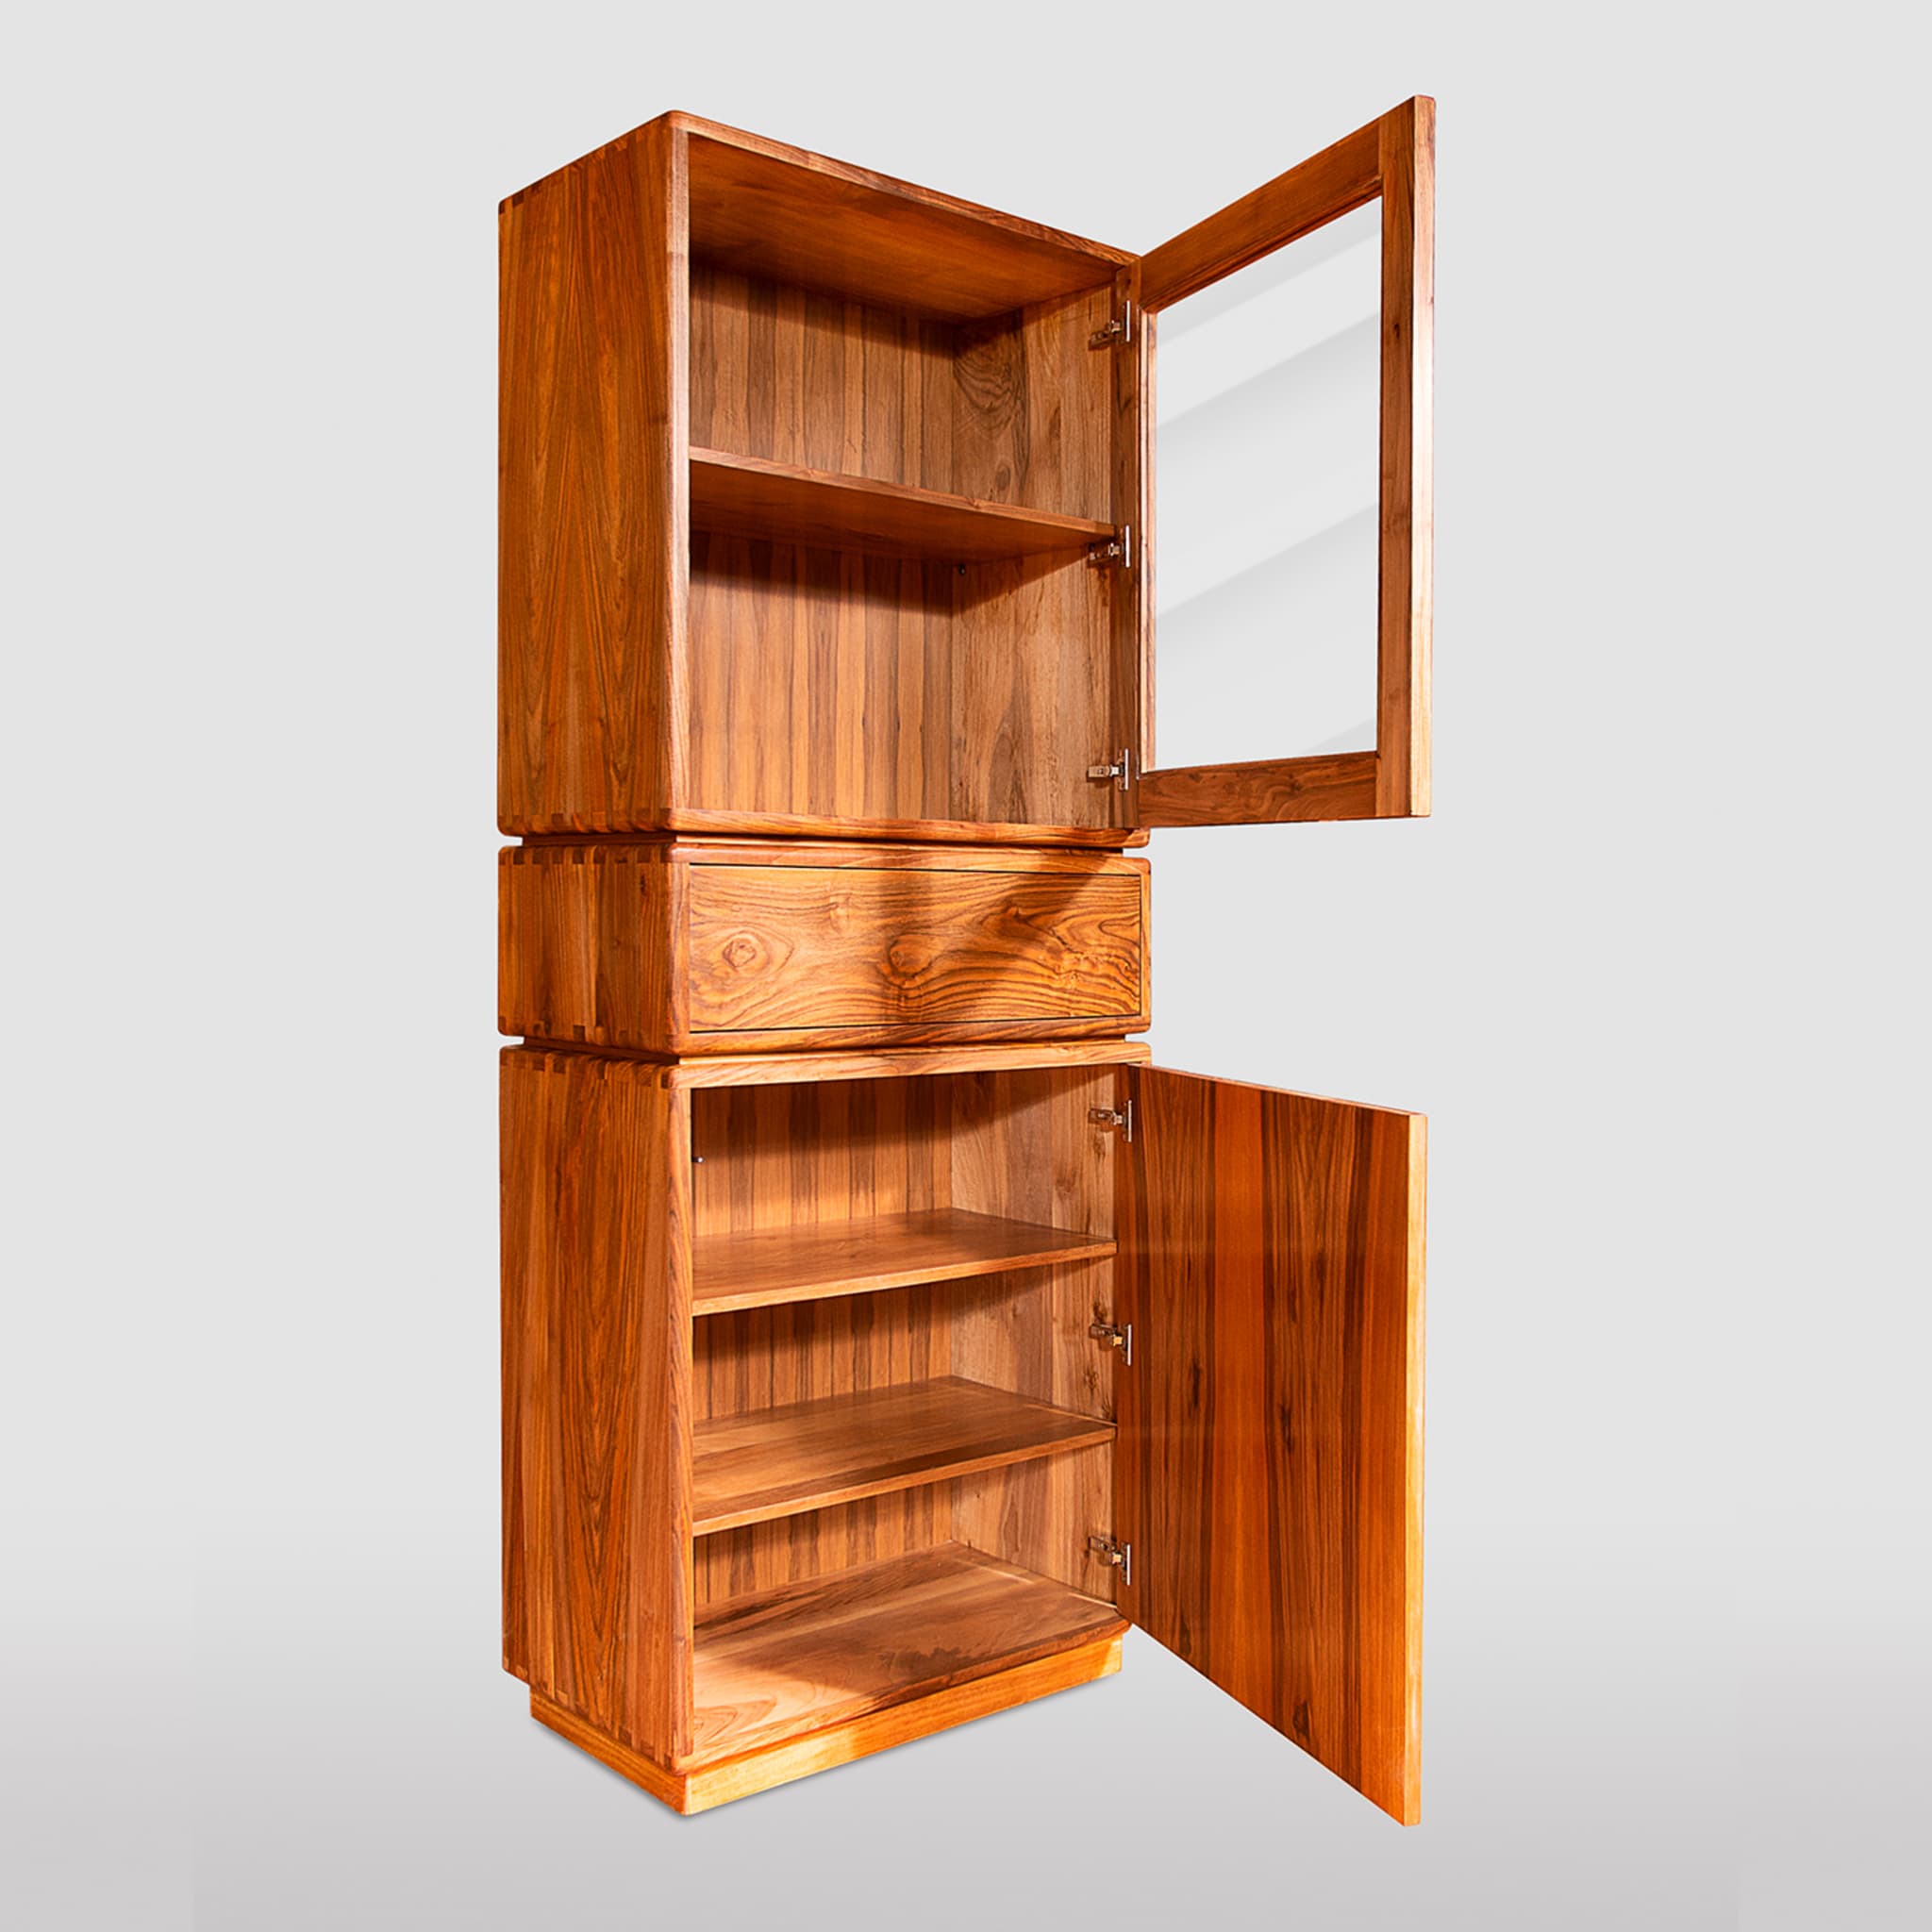 Dovetail Cabinet by Eugenio Gambella - Alternative view 4